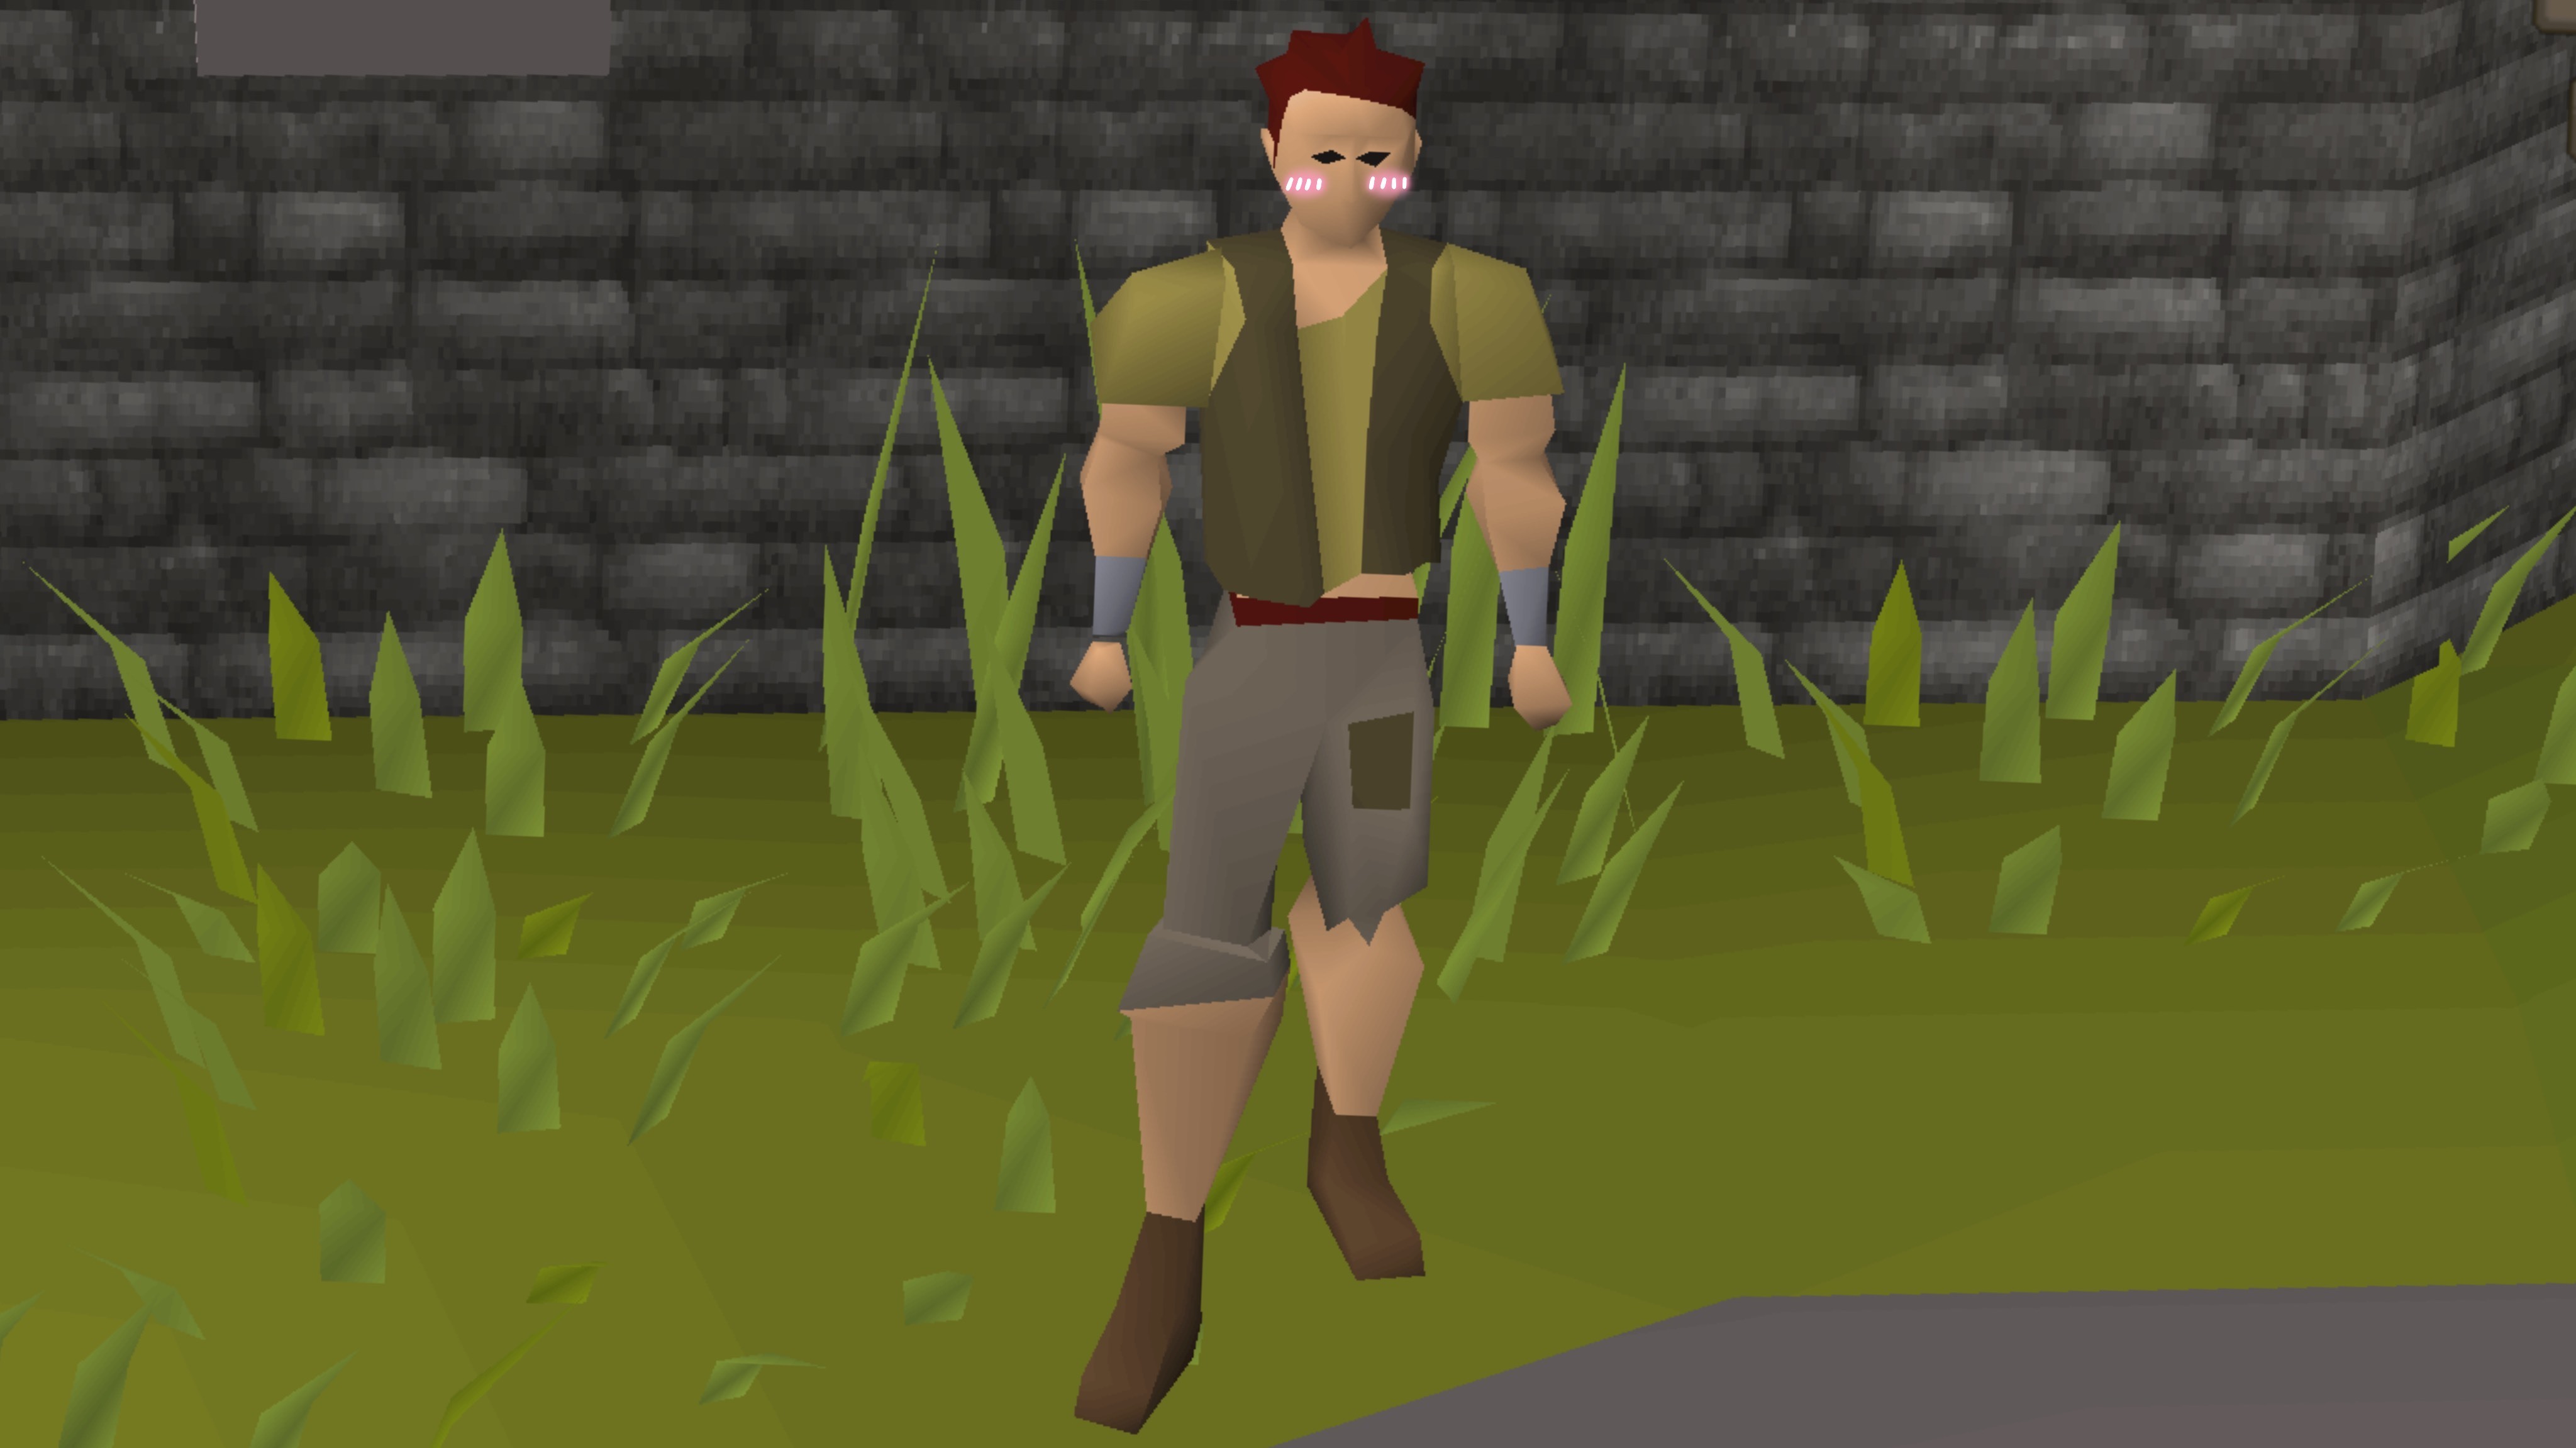 Old School Runescape - New players 🤝 Old School RuneScape Wiki 🌍 Starting  (or returning) to Gielinor can feel overwhelming. Thankfully, the Old  School RuneScape Wiki has tons of information for players